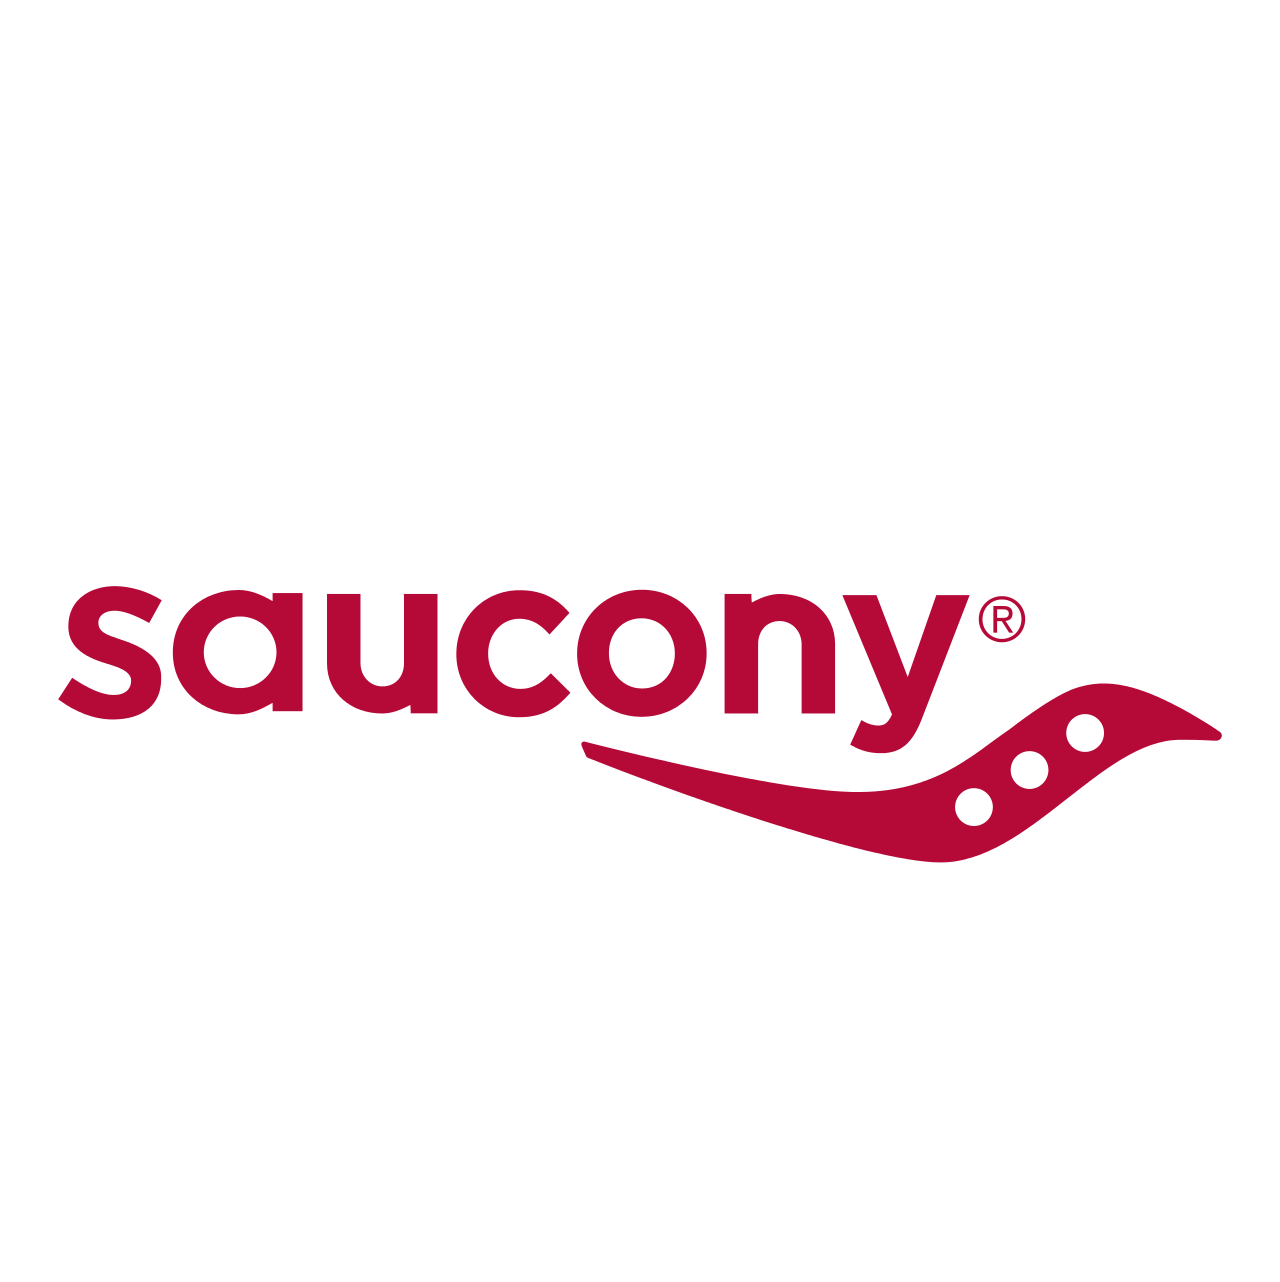 Saucony appoints new President